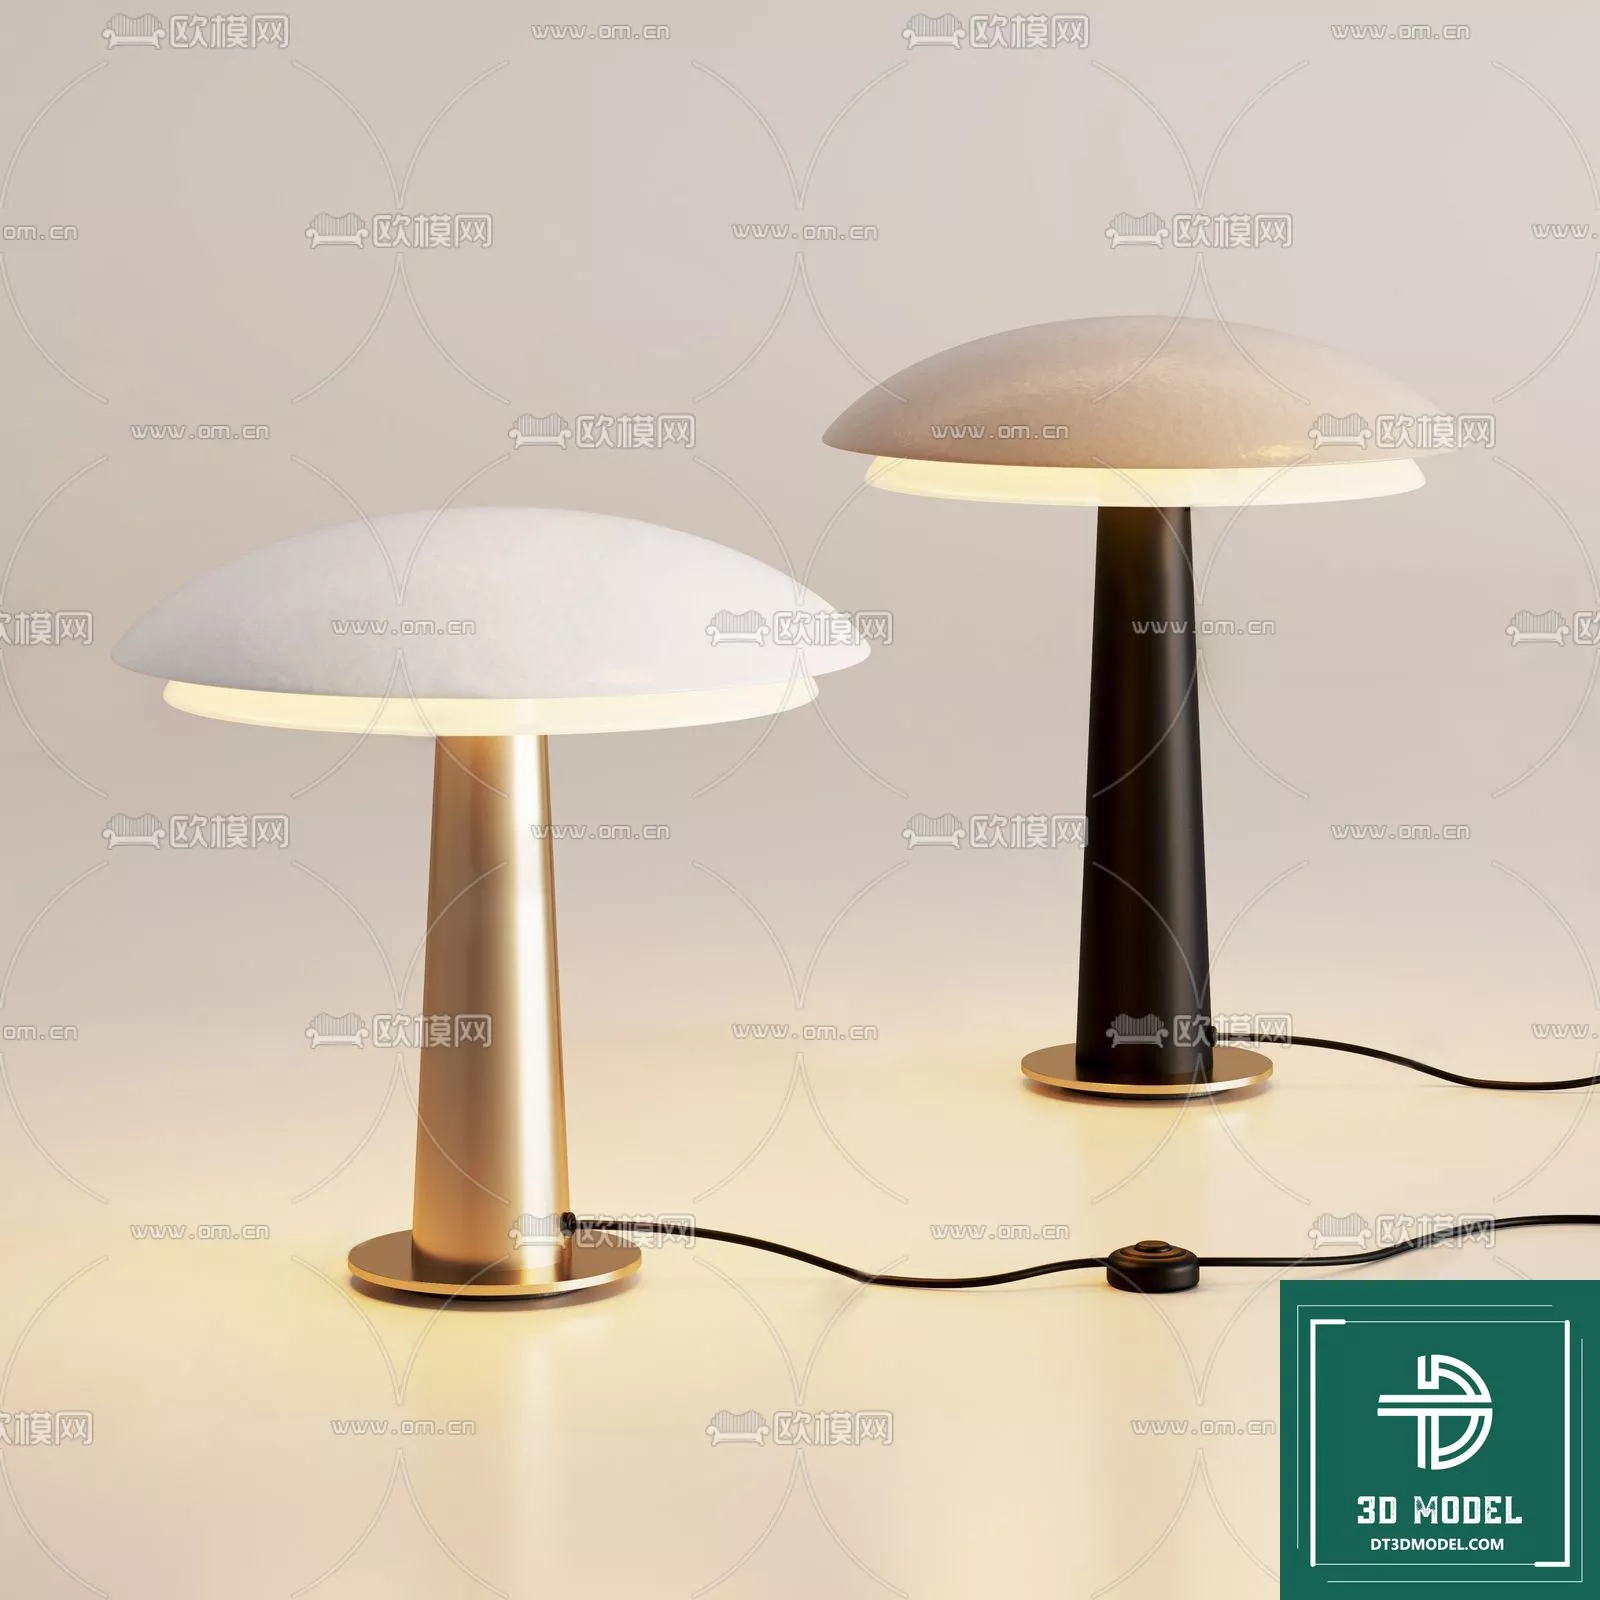 MODERN TABLE LAMP - SKETCHUP 3D MODEL - VRAY OR ENSCAPE - ID14571